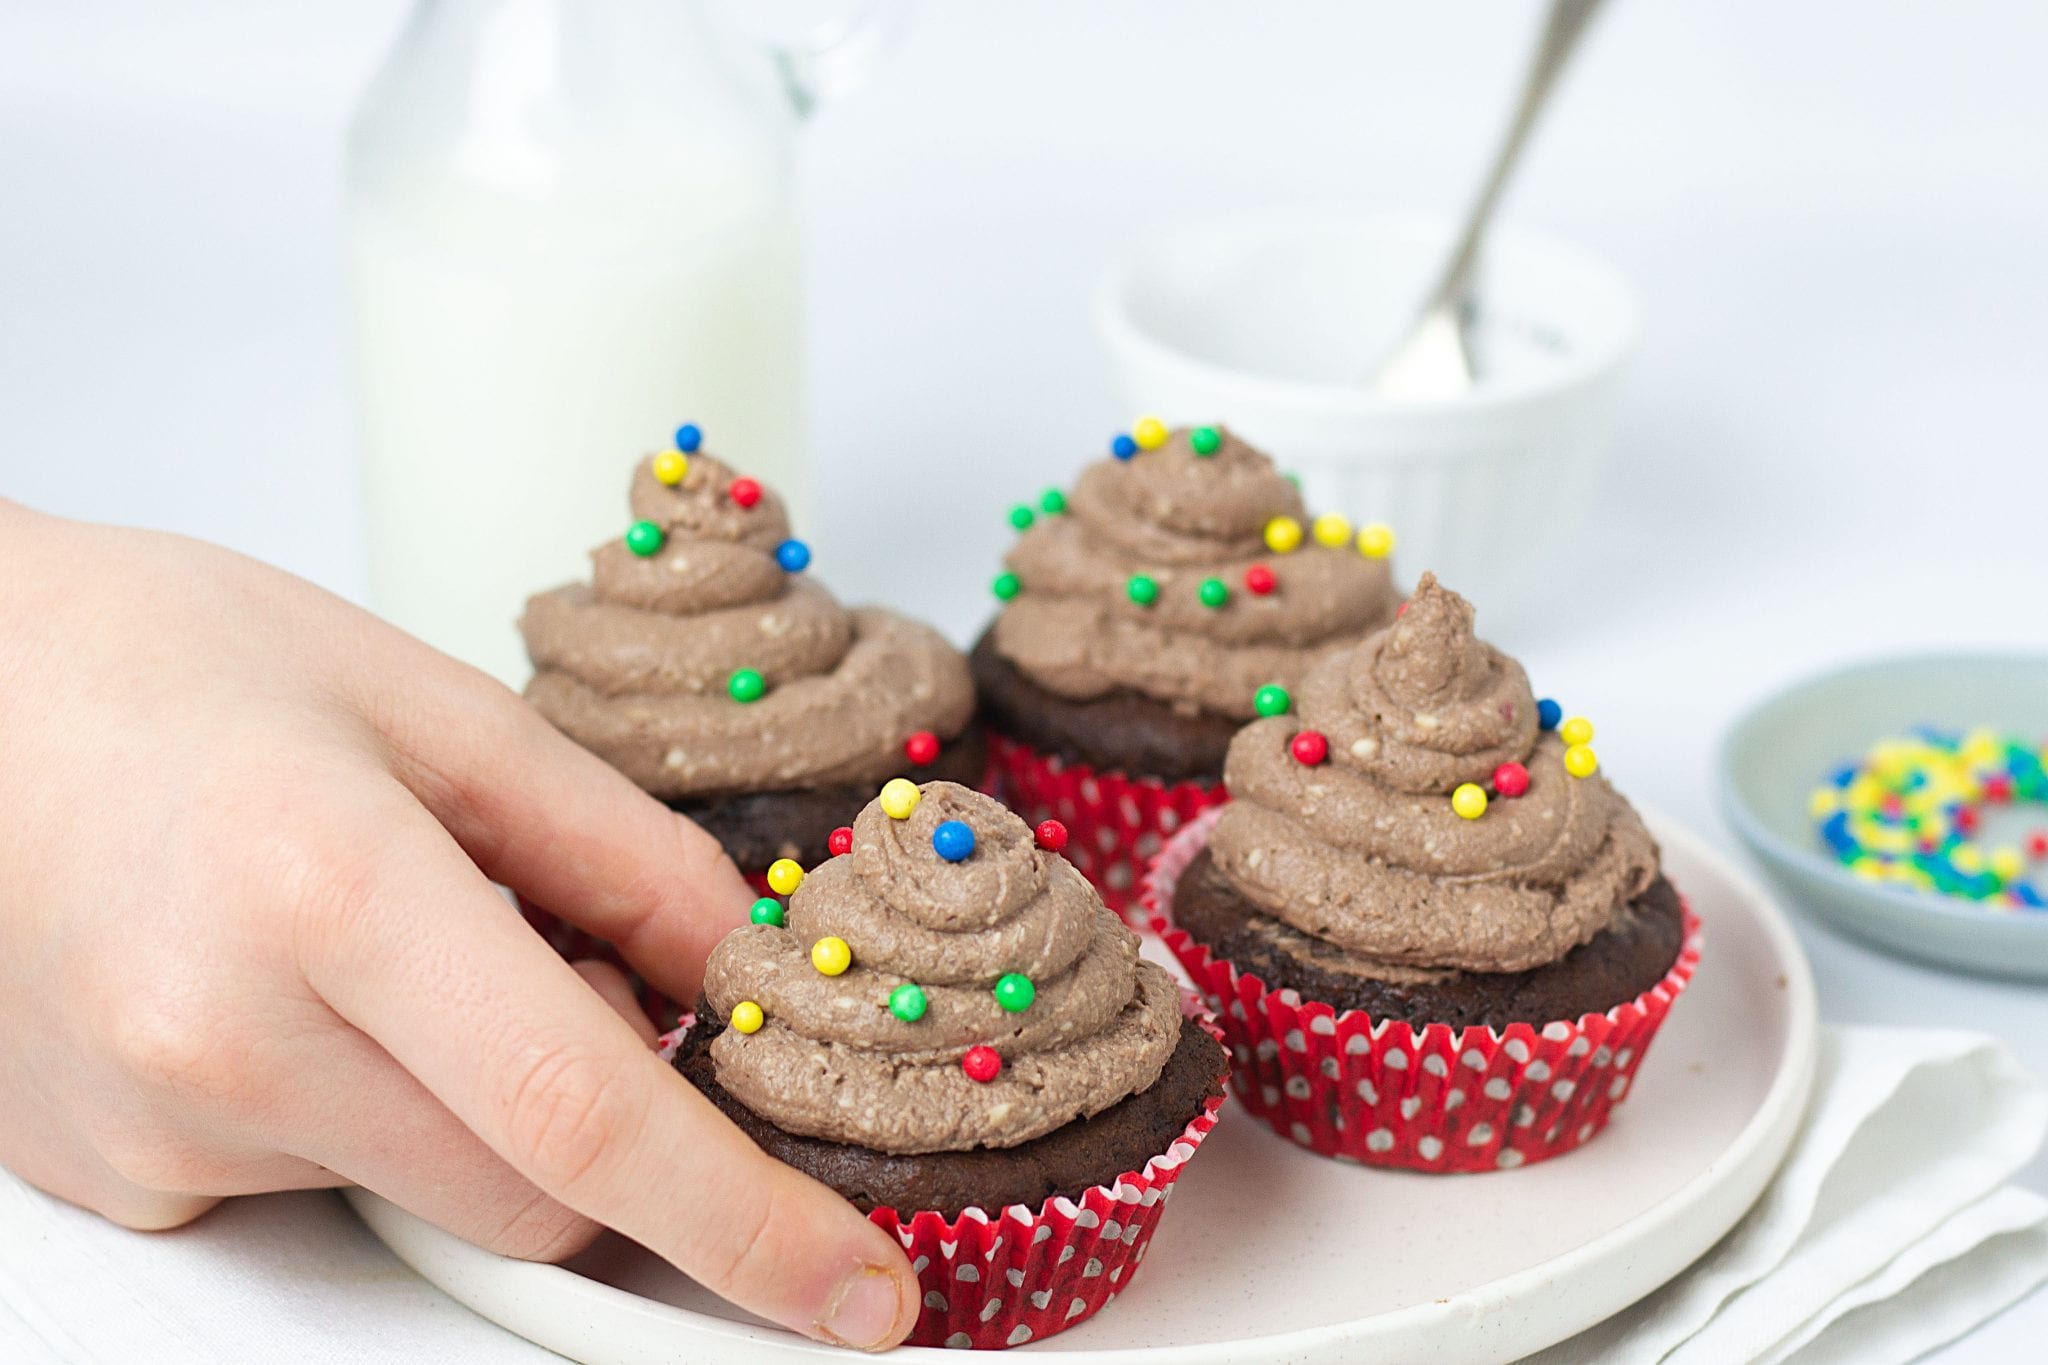 Banana and Chocolate Fairy-cakes | Kitty's Store-Cupboard